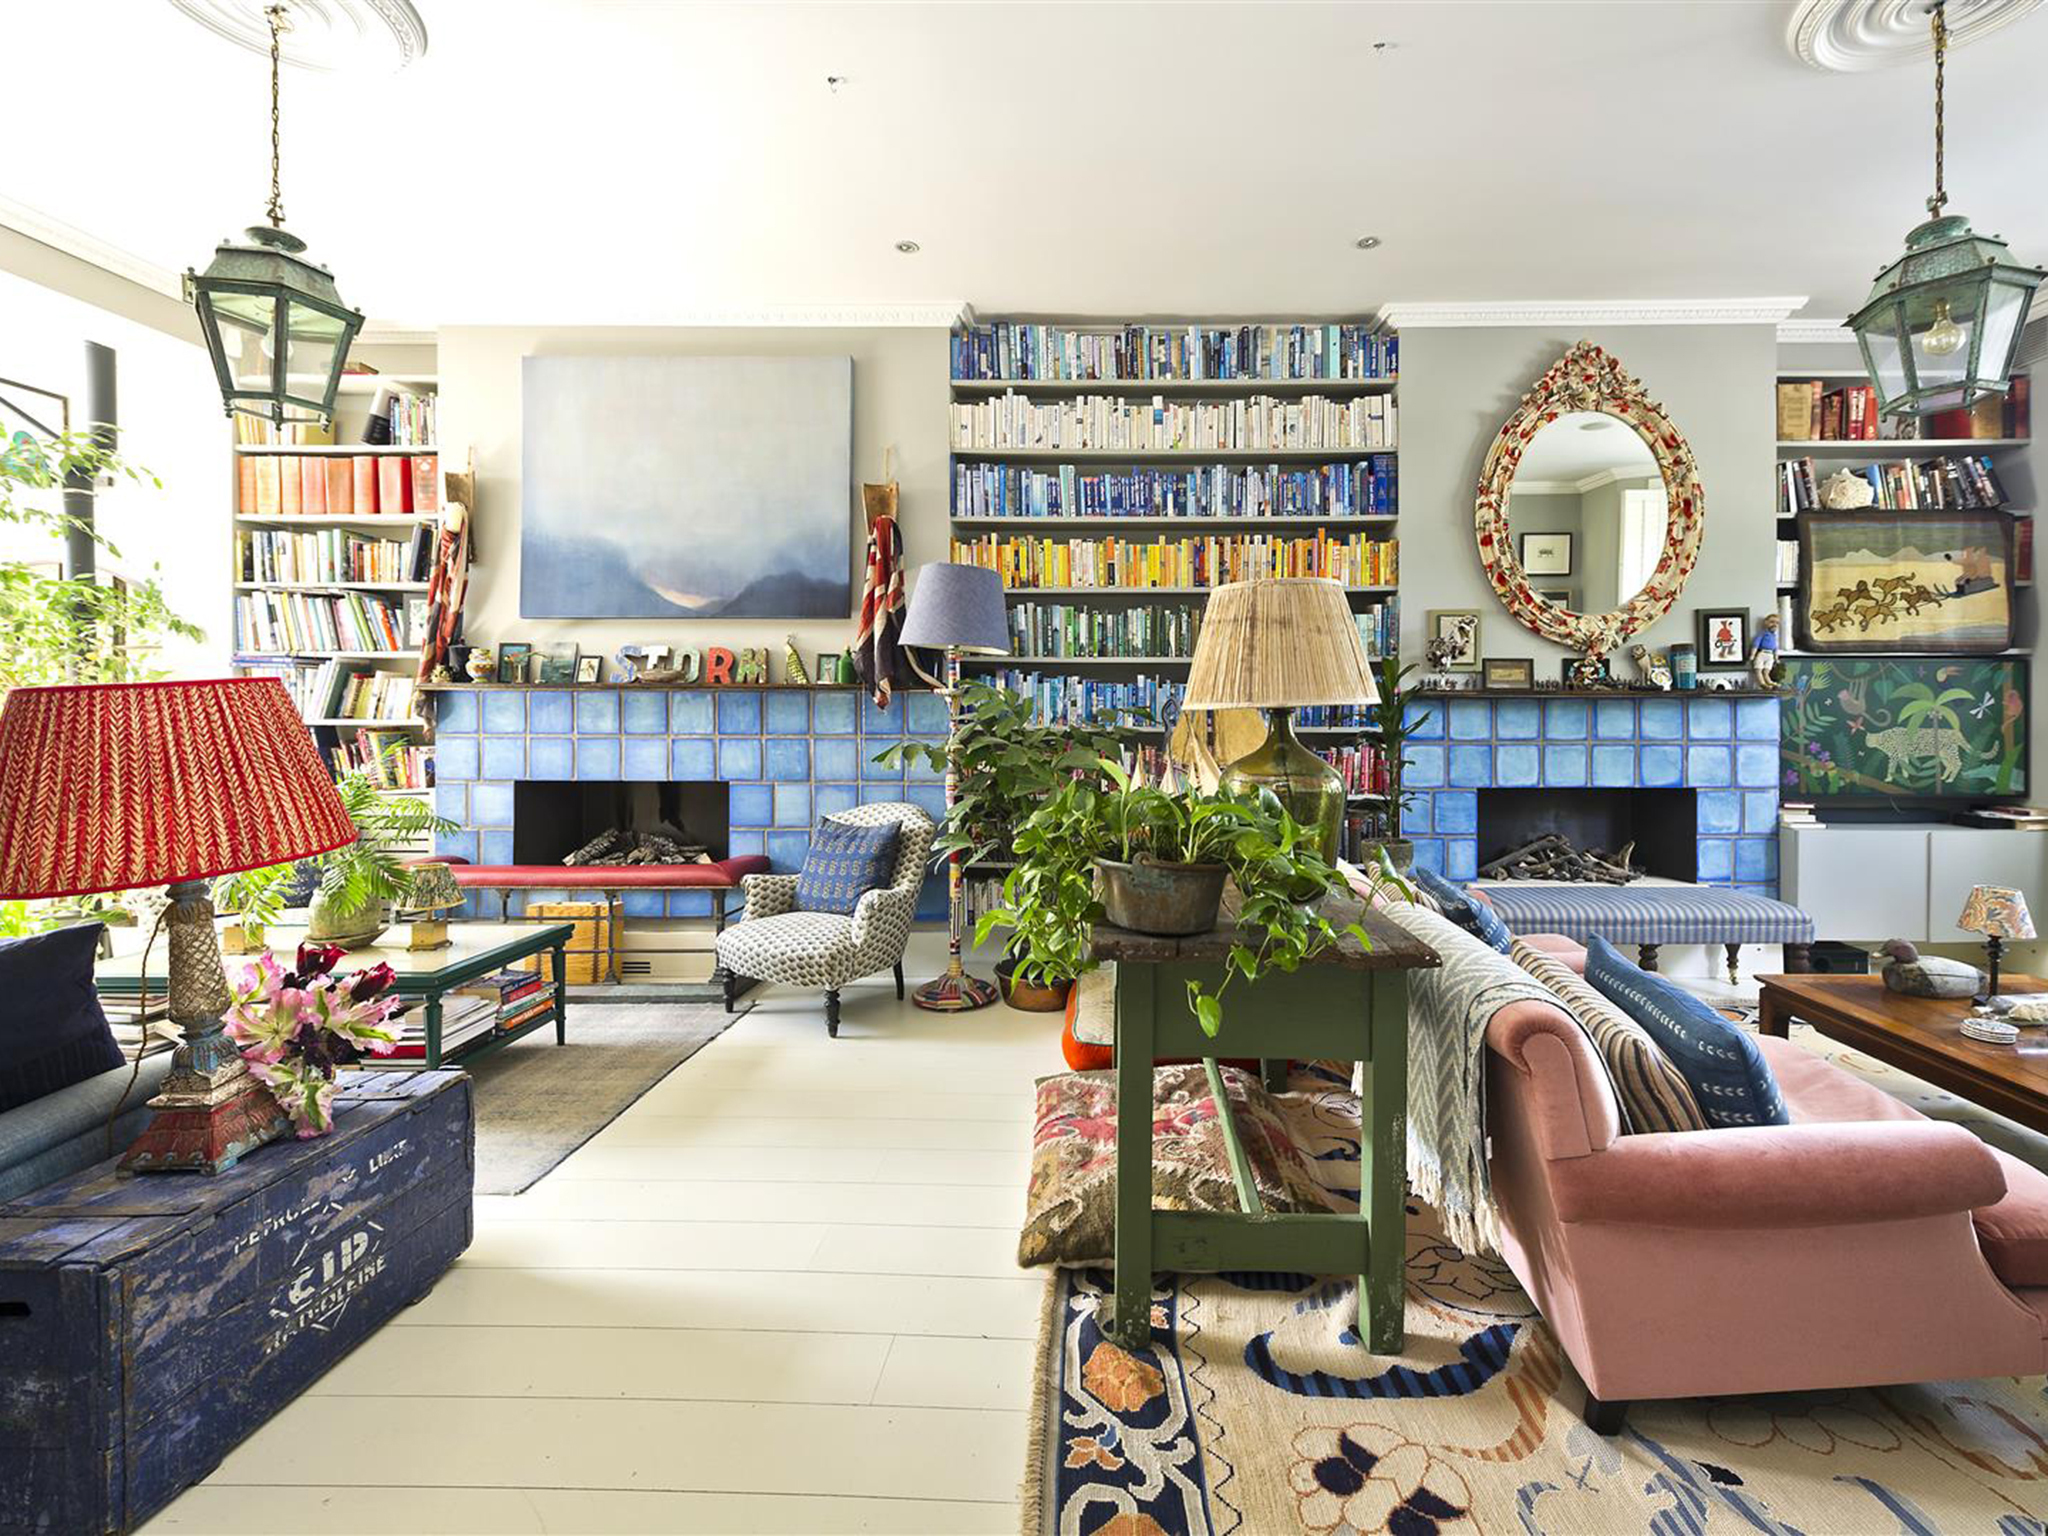 Ben Fogle’s eye-popping London home is up for rent